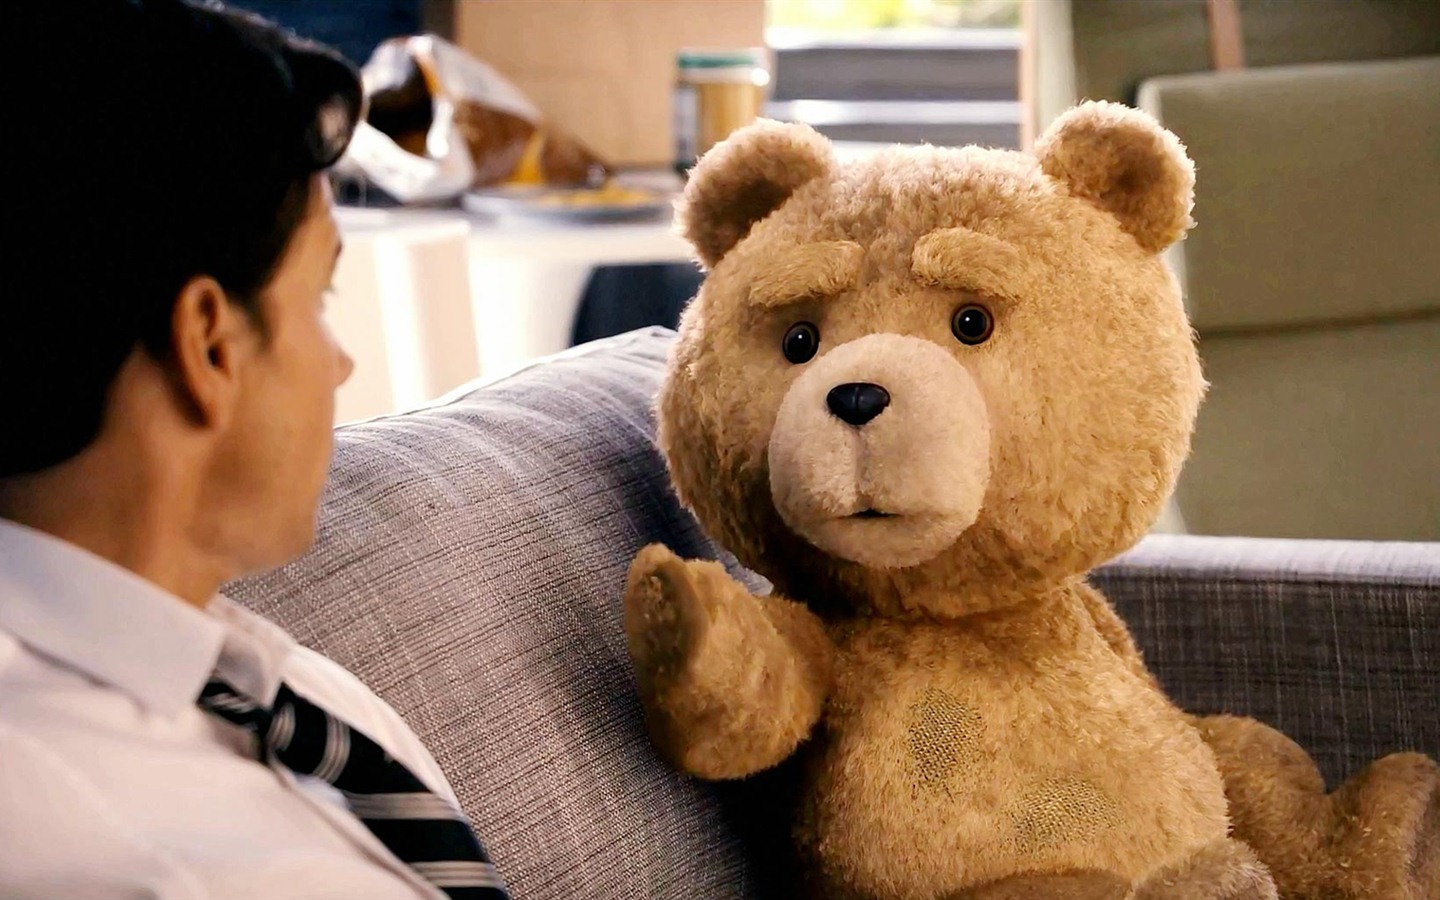 Ted 2012 HD movie wallpapers #8 - 1440x900